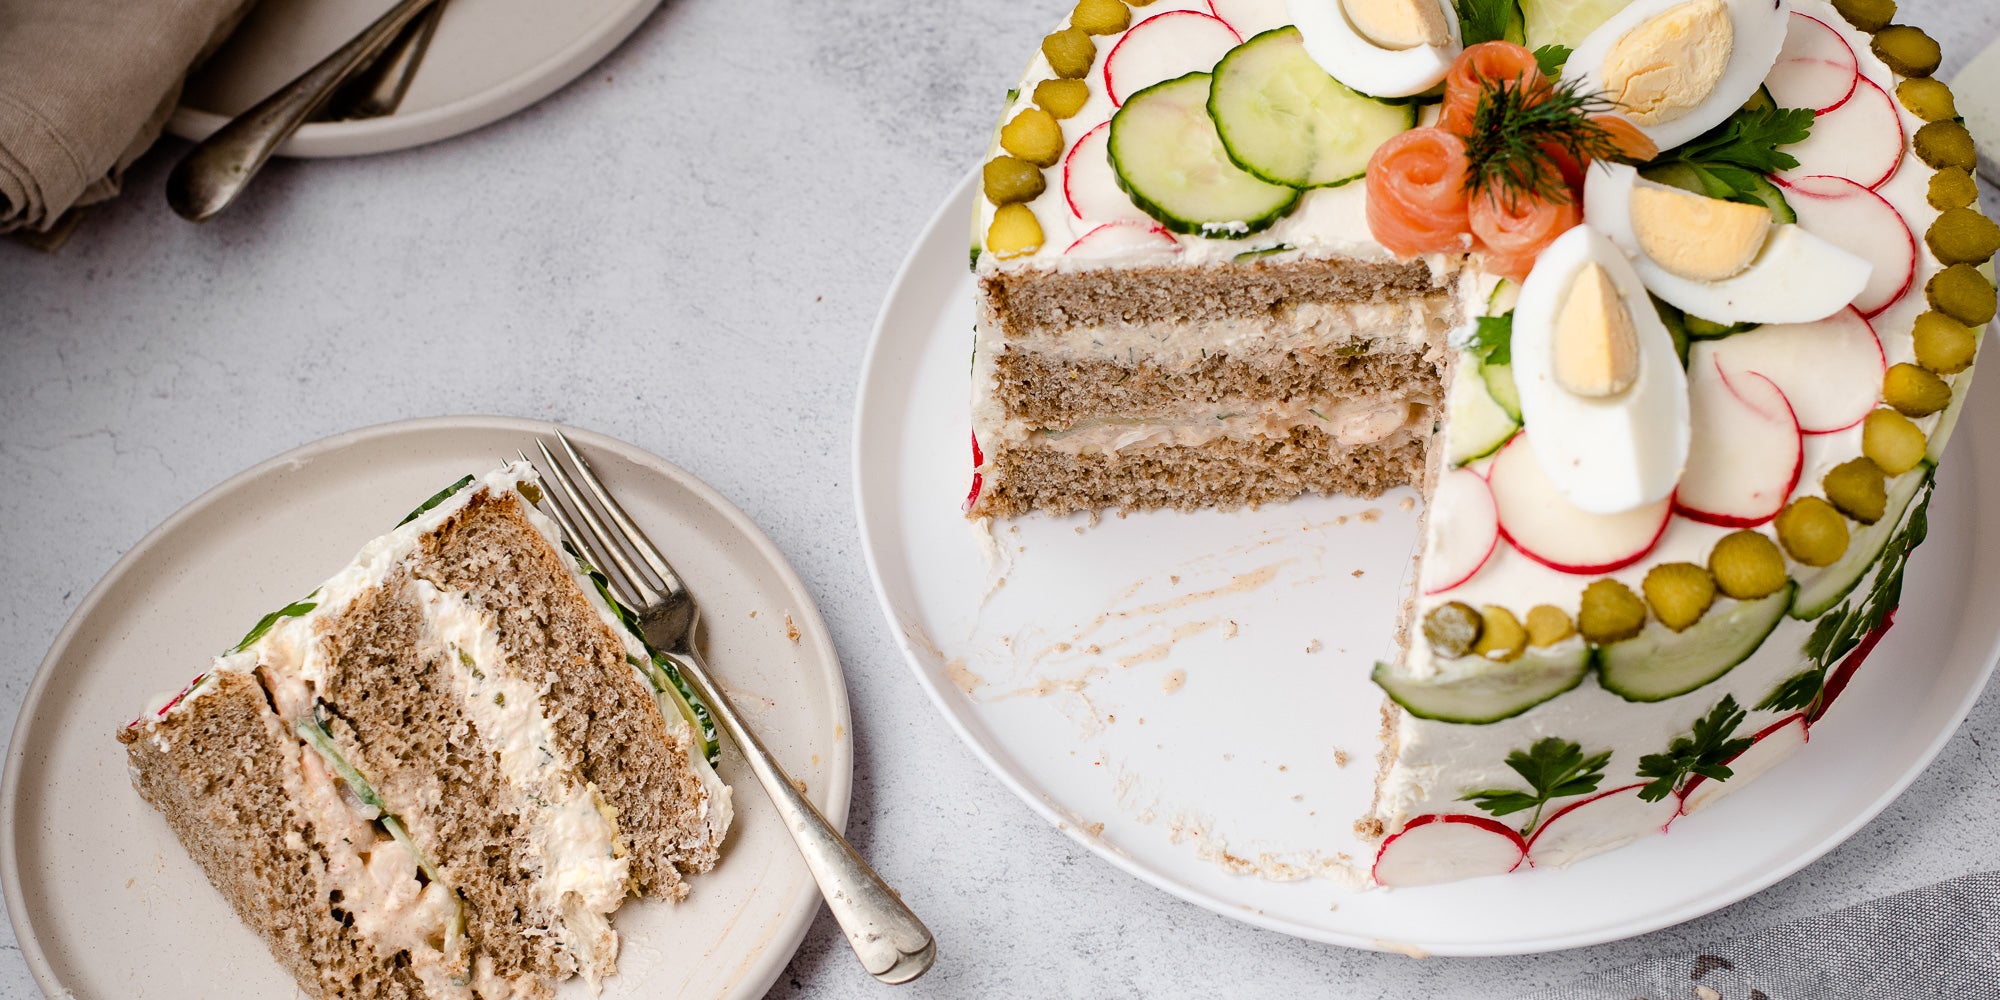 How to Make Danish Layer Cake and Why Danes Love It So Much